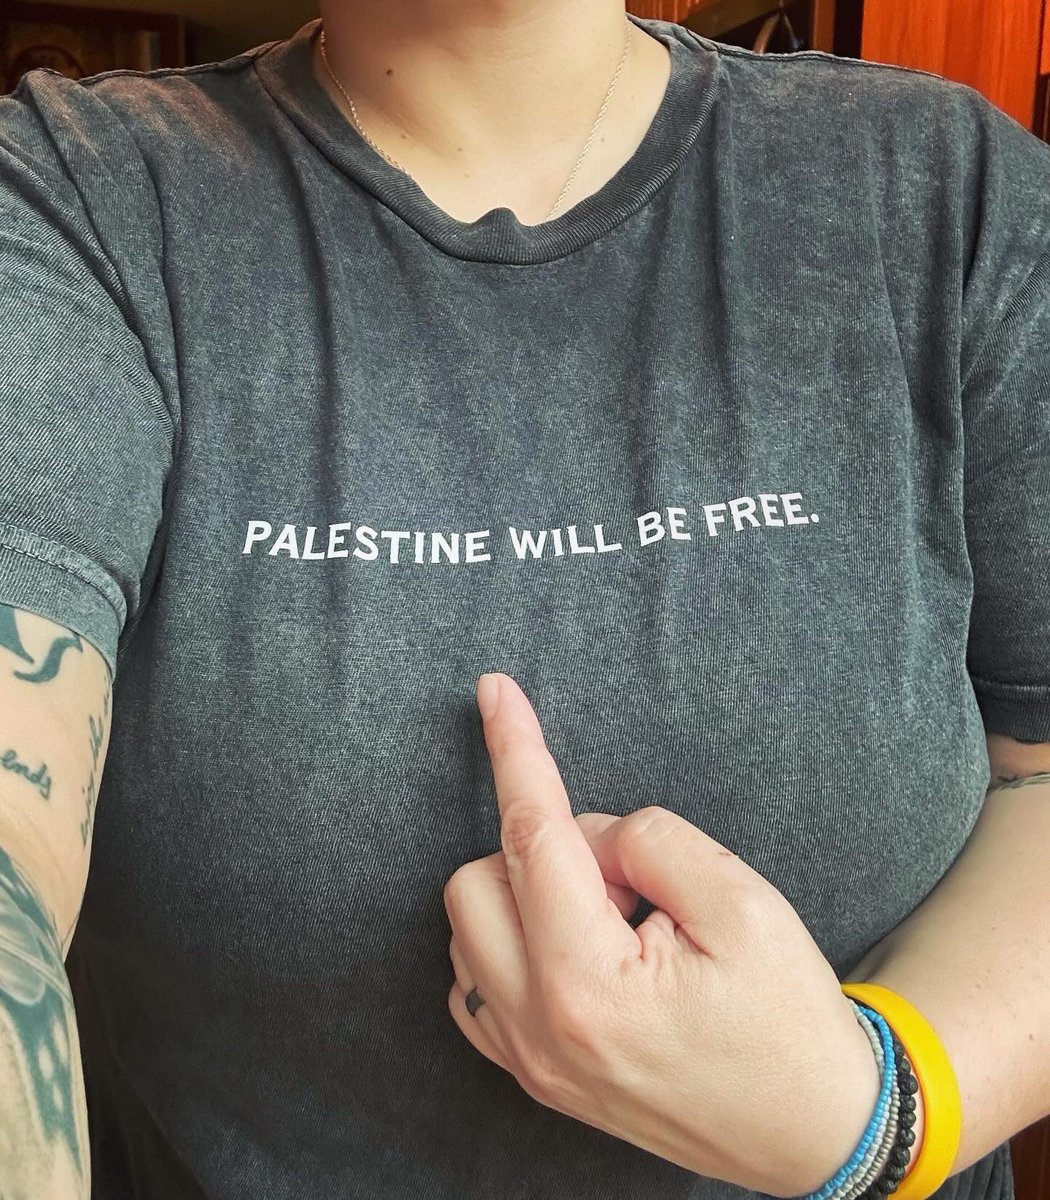 Rocking my @WearThePeaceCo #PalestineWillBeFree t-shirt 💪🏼❤️🍉🇵🇸 Because Palestine WILL be free.